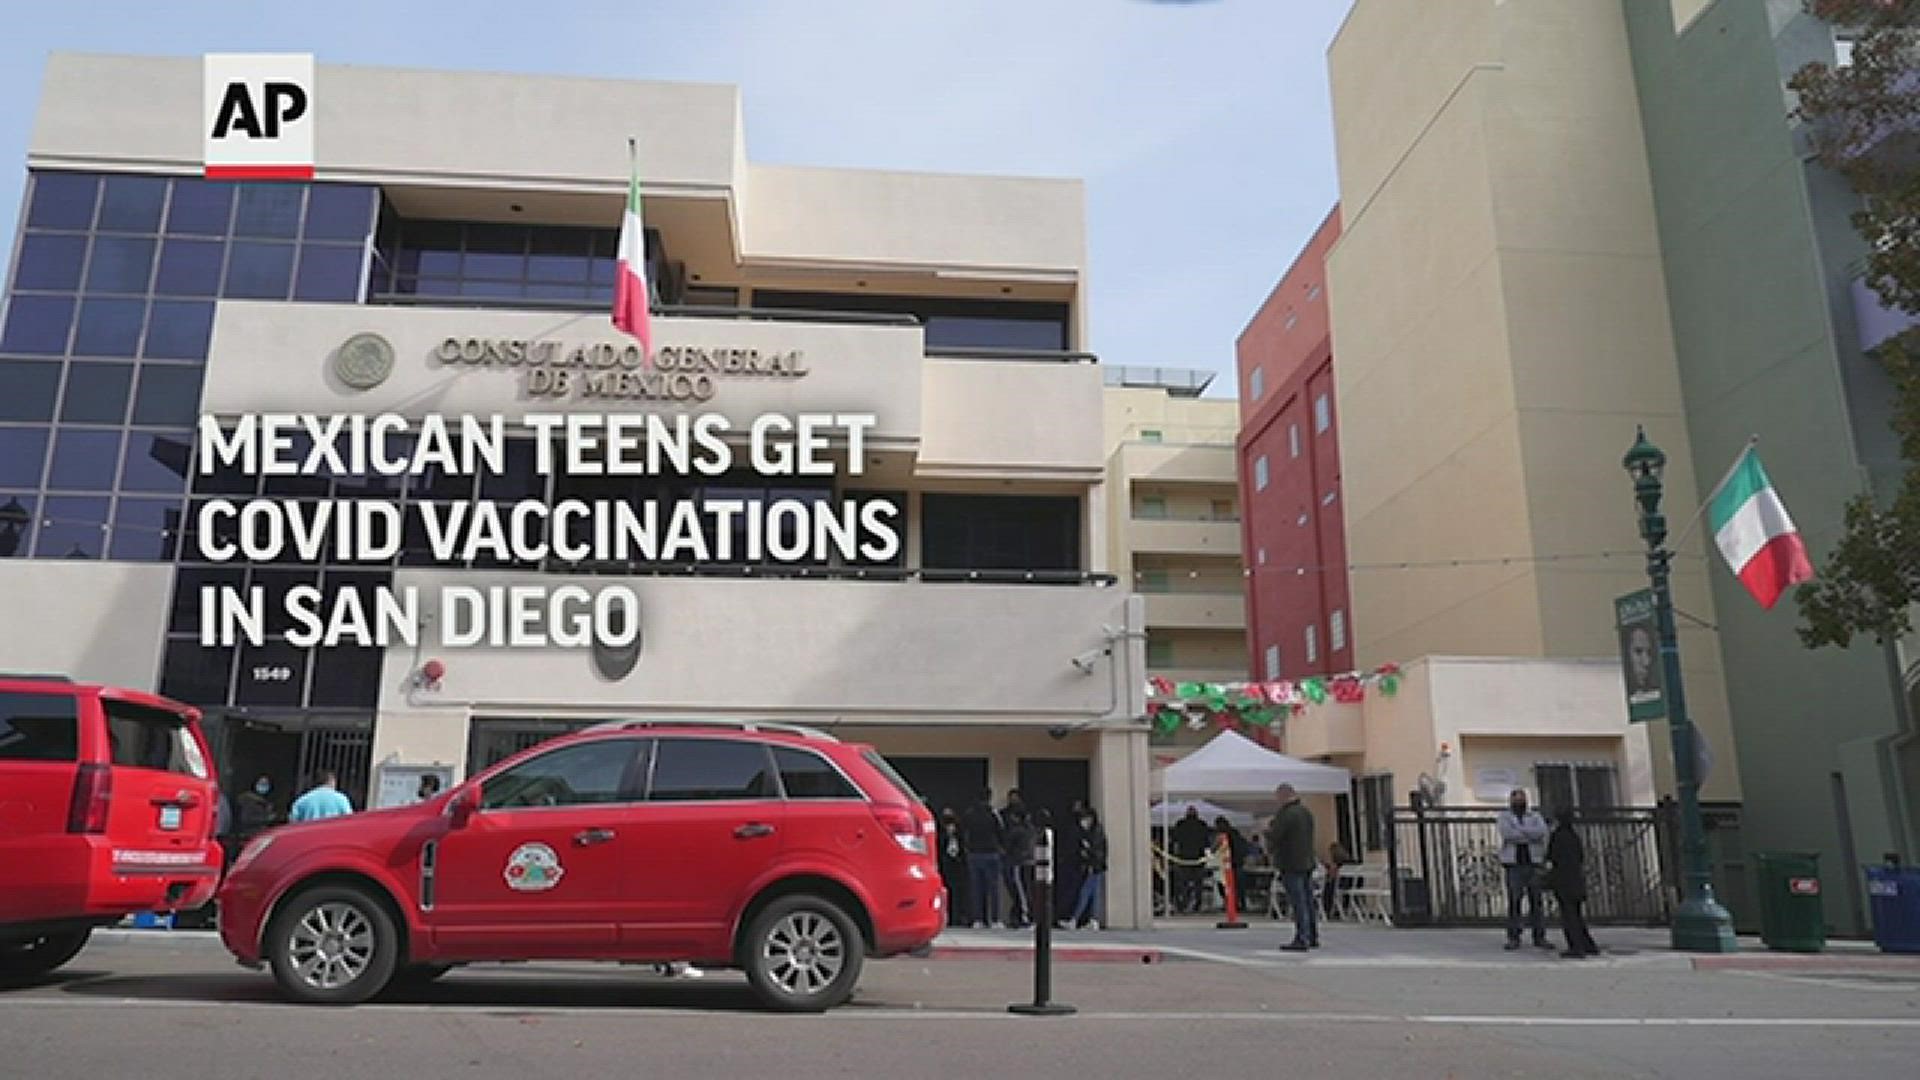 Scores of Mexican adolescents were bused to California to get vaccinated against the coronavirus.